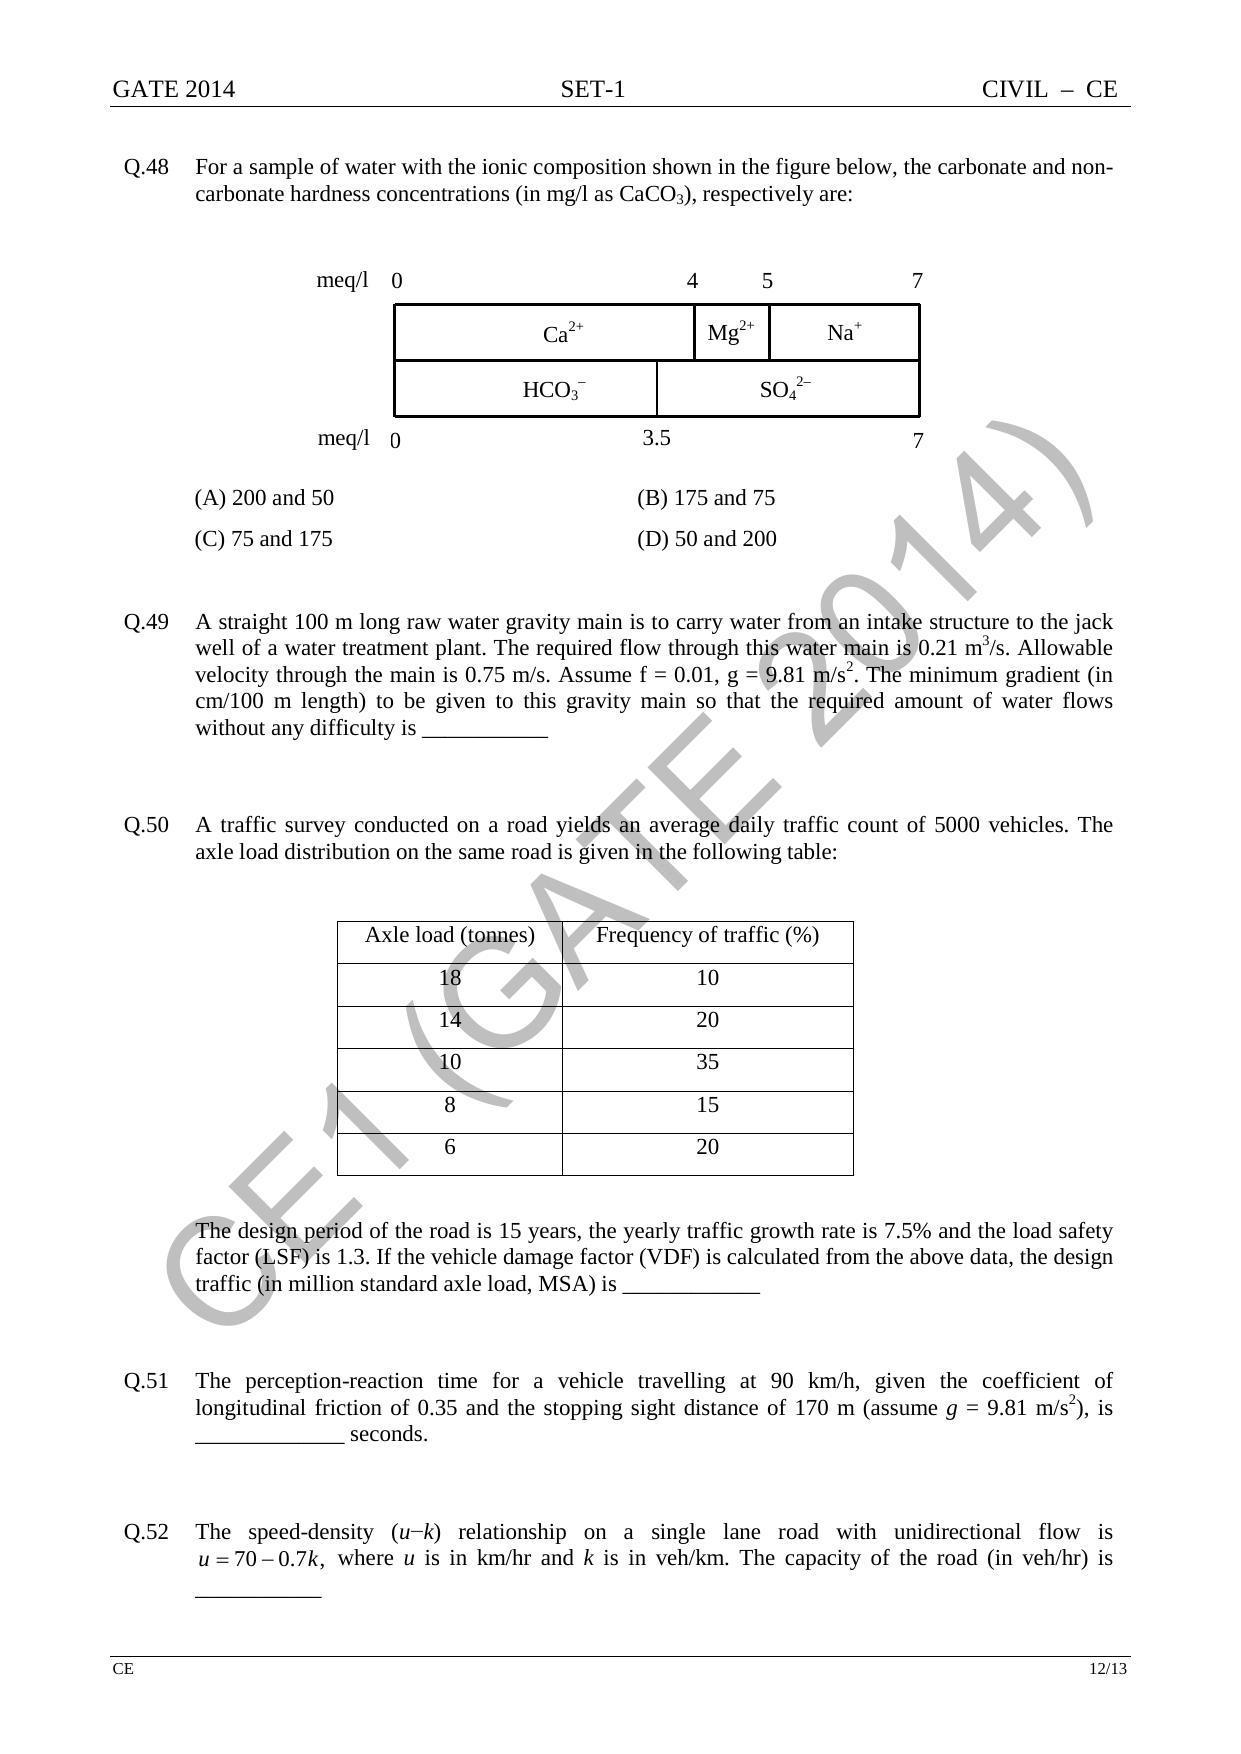 GATE 2014 Civil Engineering (CE) Question Paper with Answer Key - Page 19